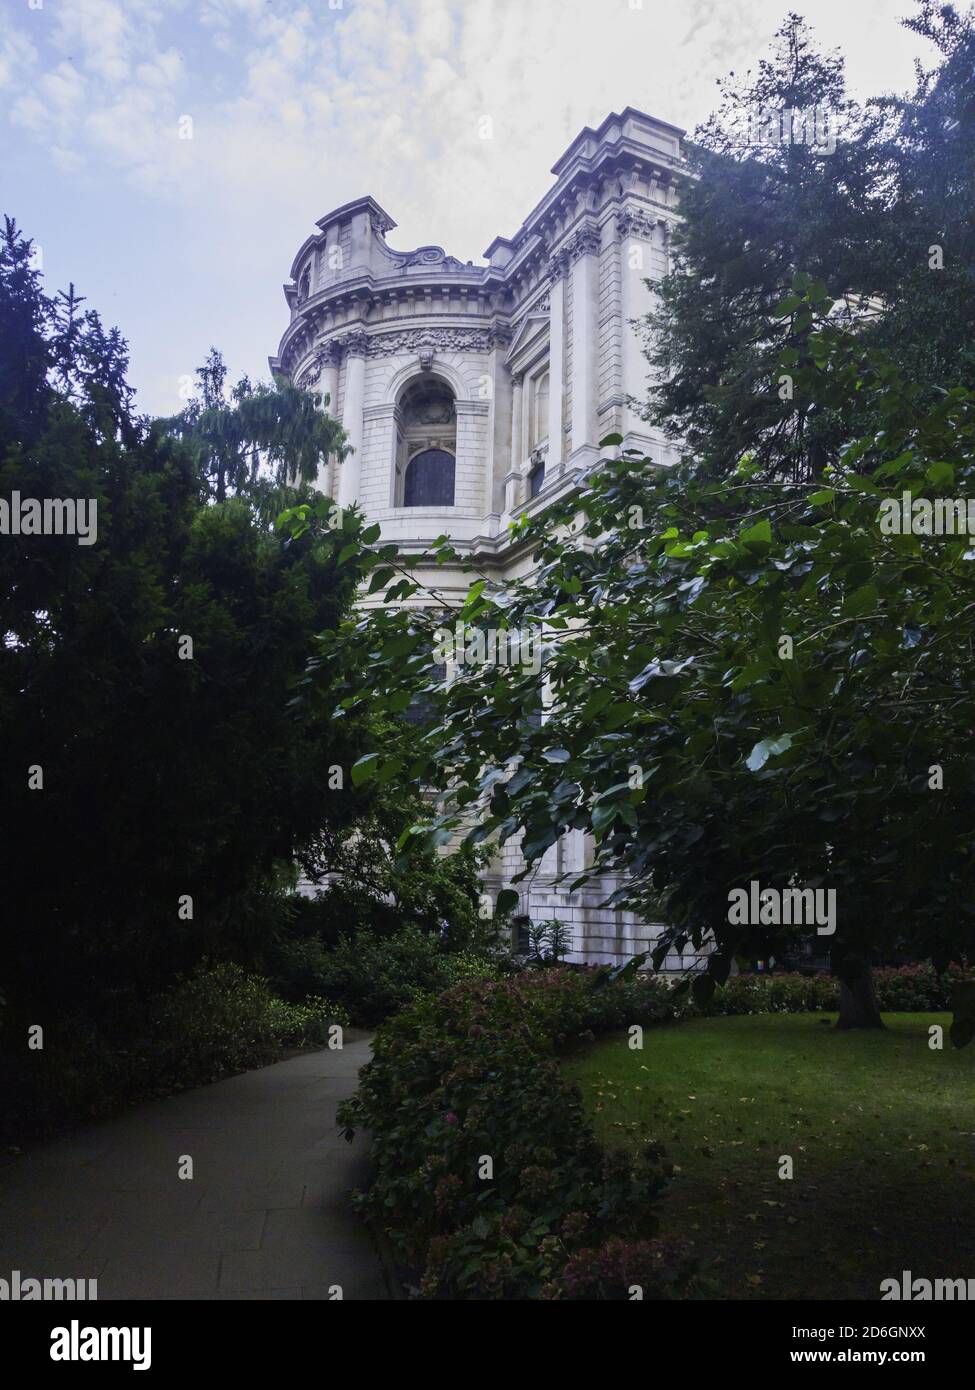 LONDON, UNITED KINGDOM - Sep 19, 2020: different angle of st pauls cathedral with a nice garden Stock Photo